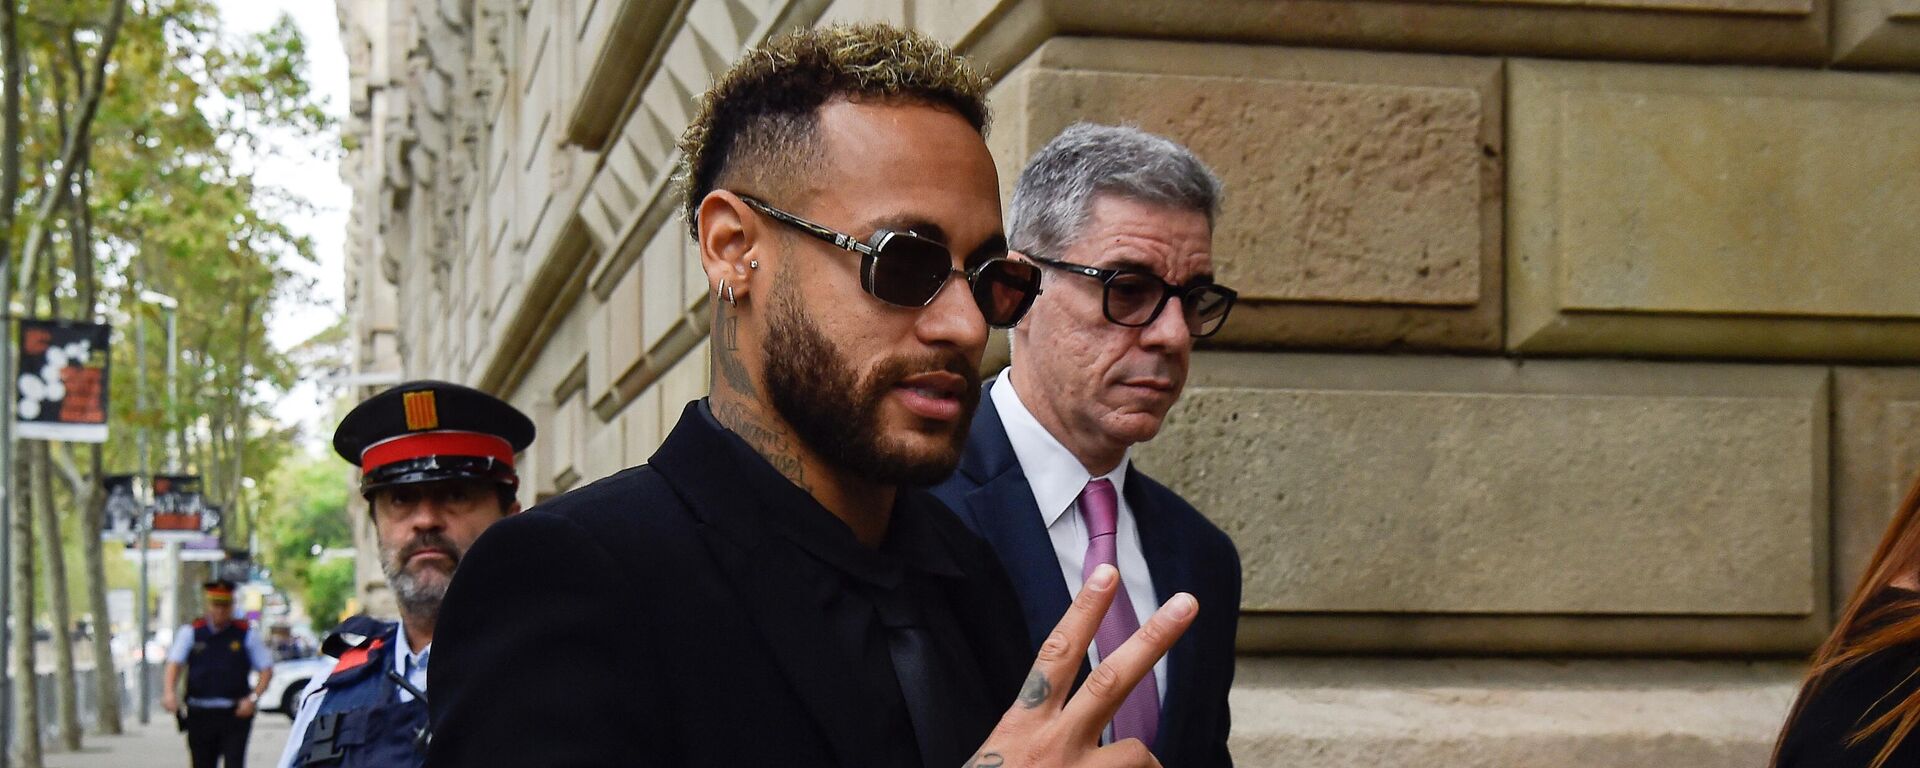 Paris Saint-Germain's Brazilian forward Neymar gestures as he leaves after attending the opening audience at the courthouse in Barcelona on October 17, 2022, on the first day of his trial. - - Sputnik International, 1920, 17.10.2022